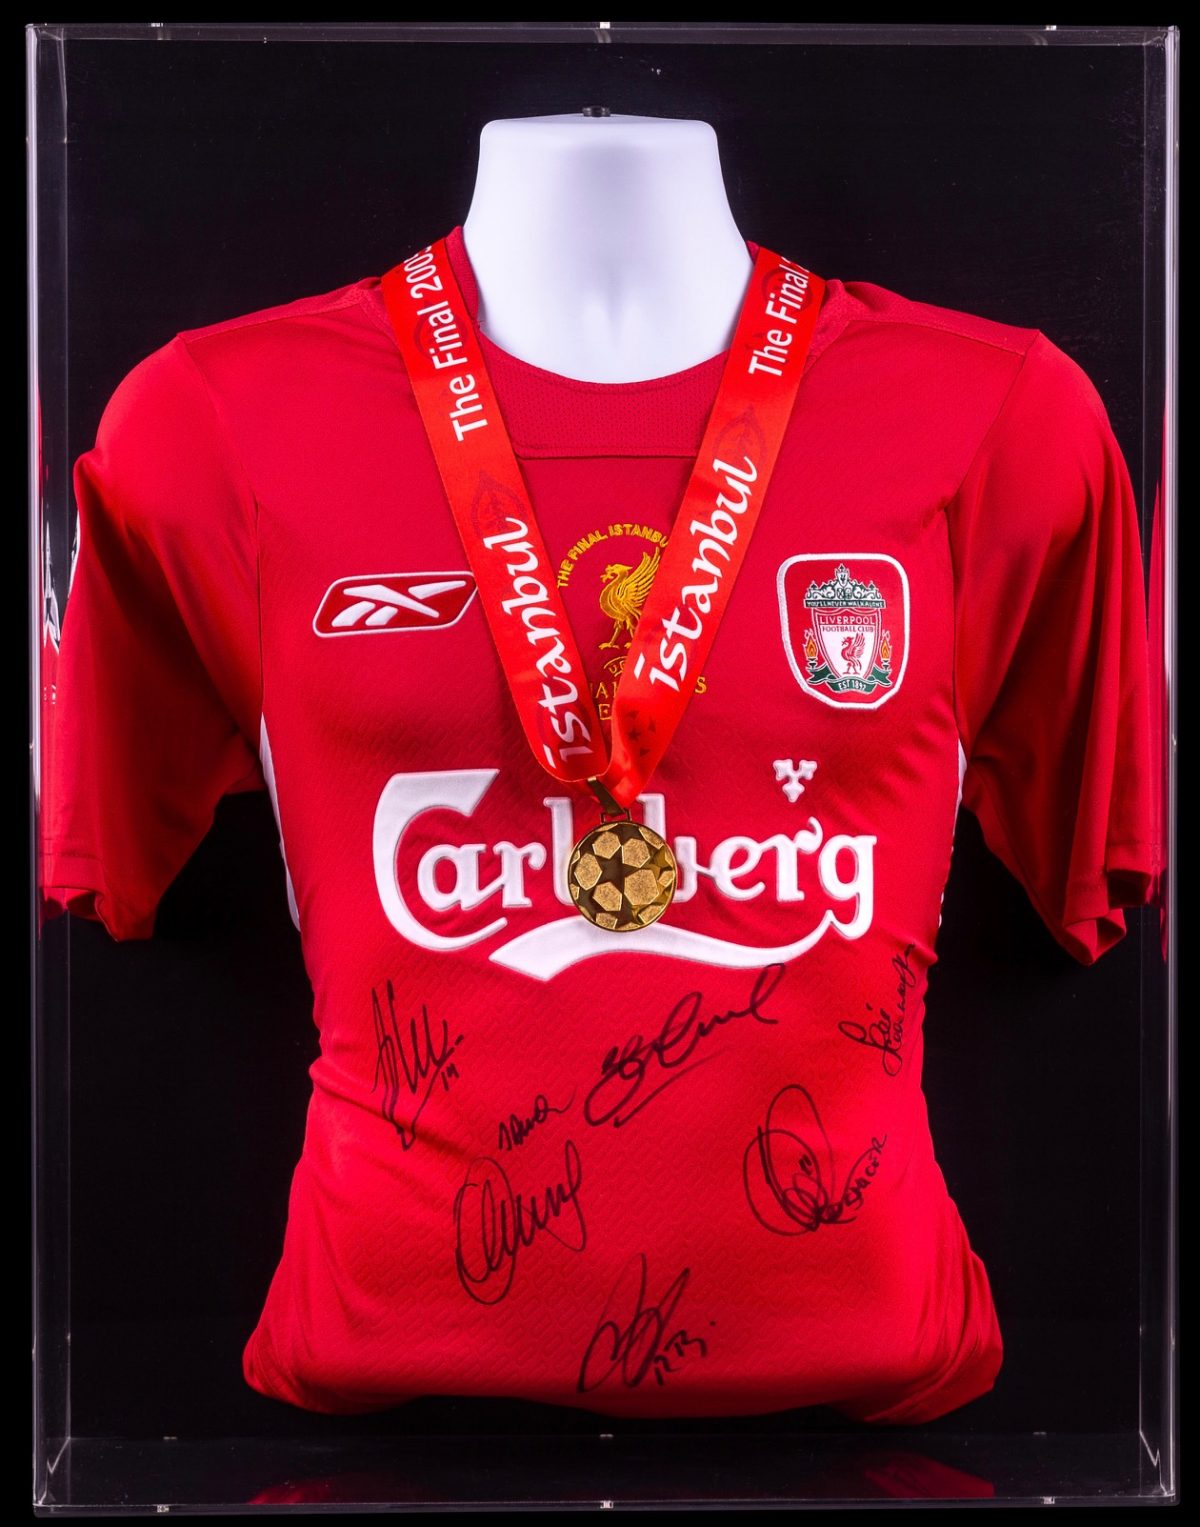 Liverpool UEFA Champions League Final 2005 Signed Shirt & Medal Display Istanbul